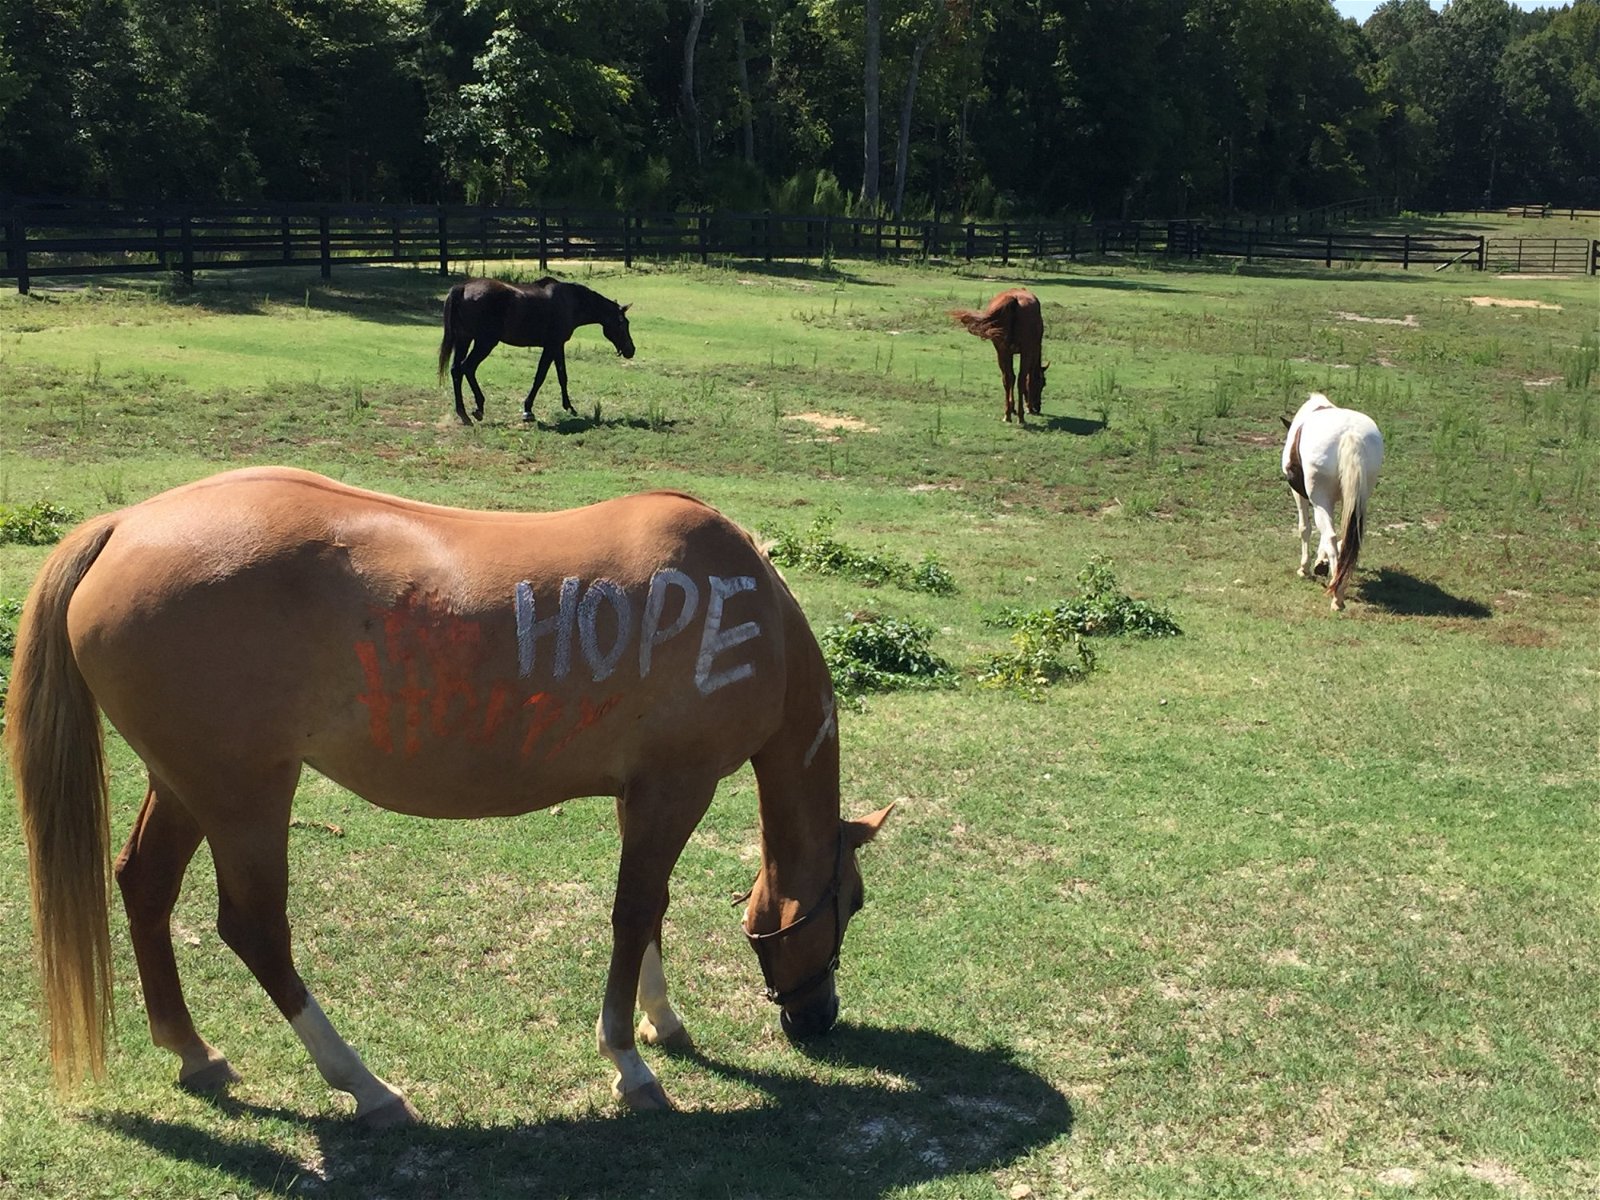 Horses in a pasture; nearest horse has the word "hope" painted on its side